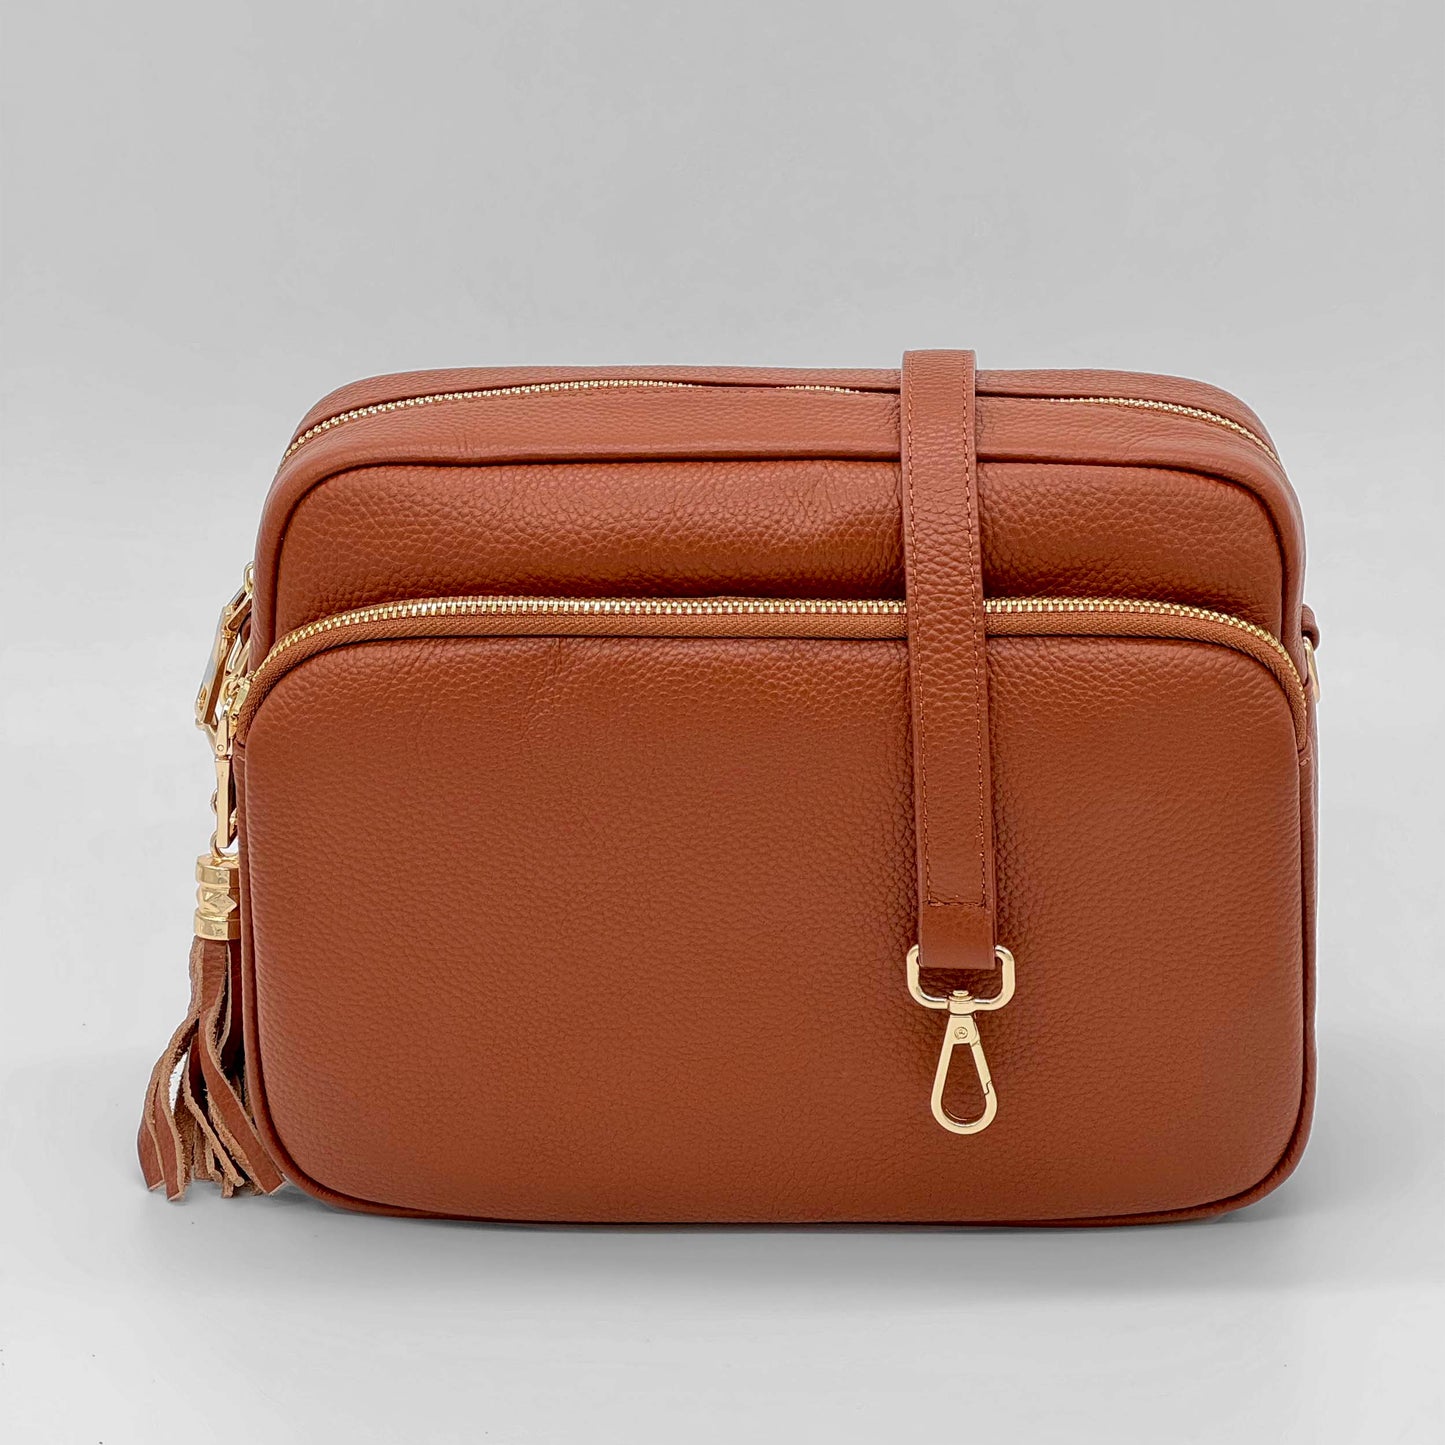 Bag With Matching Leather Strap